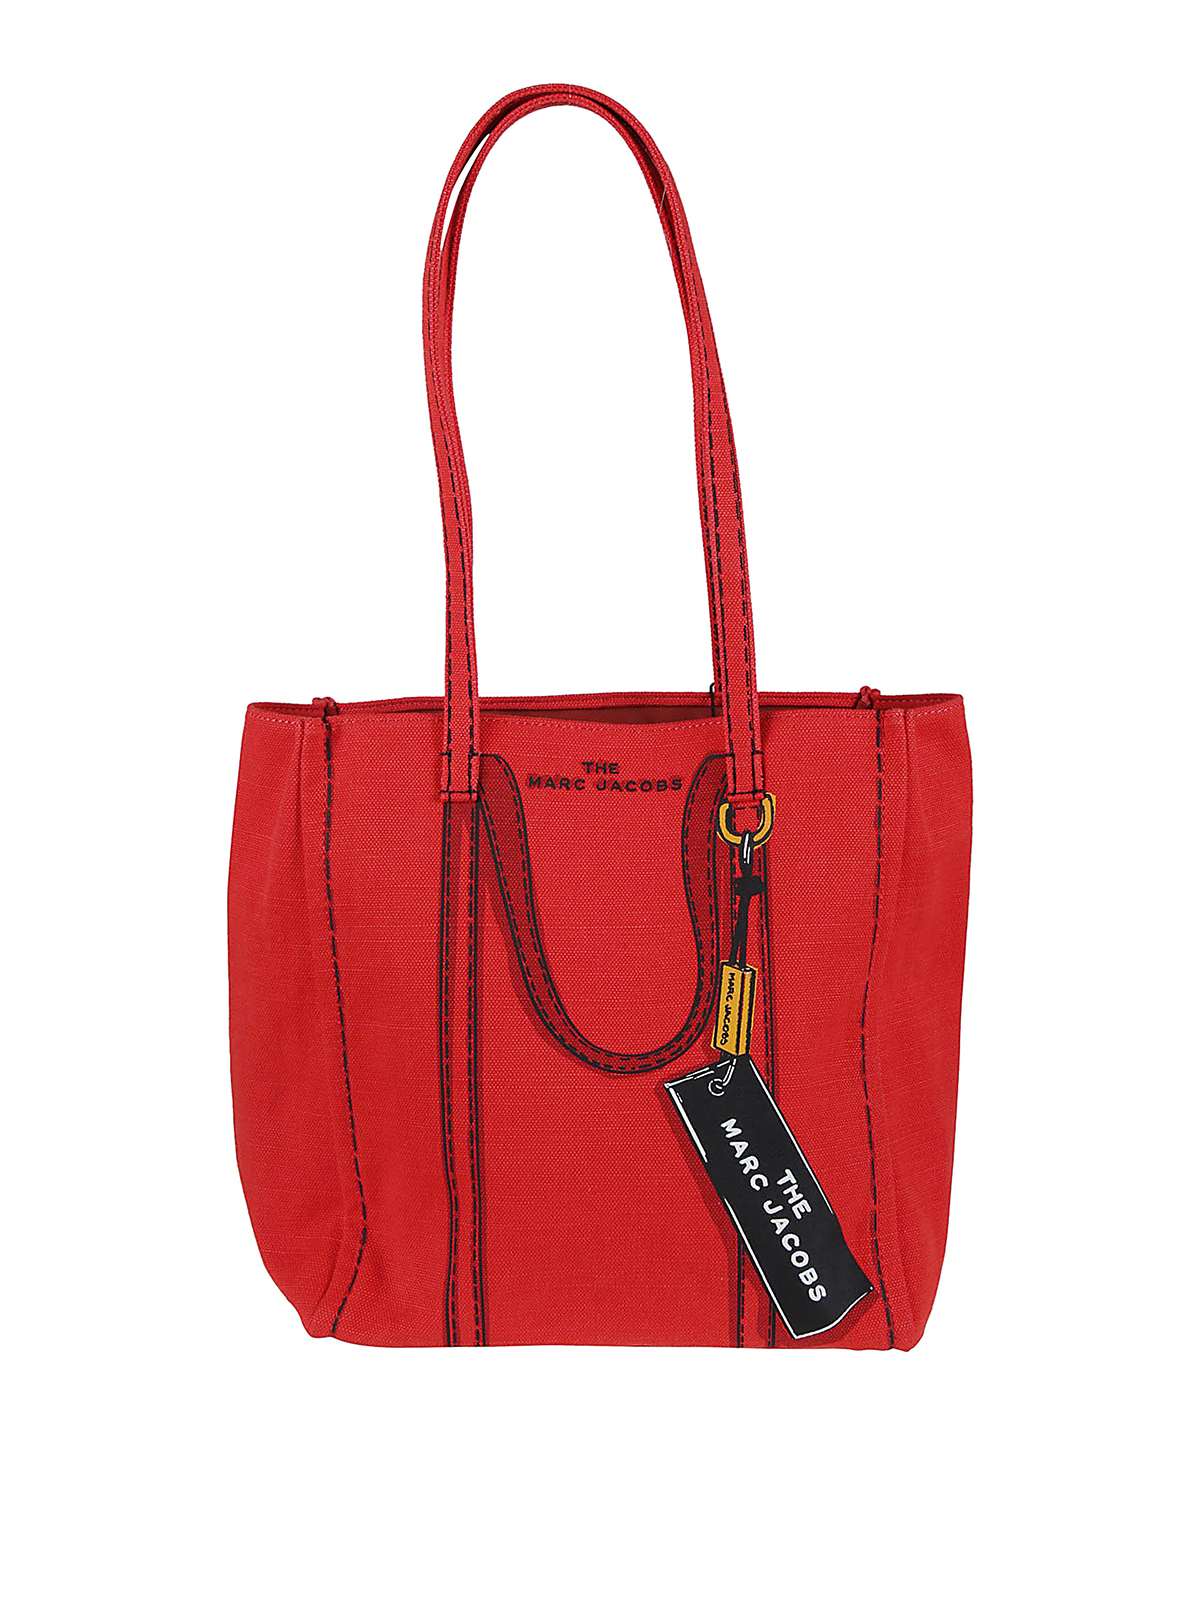 MARC JACOBS THE TROMPE LOEIL TAG RED CANVAS TOTE